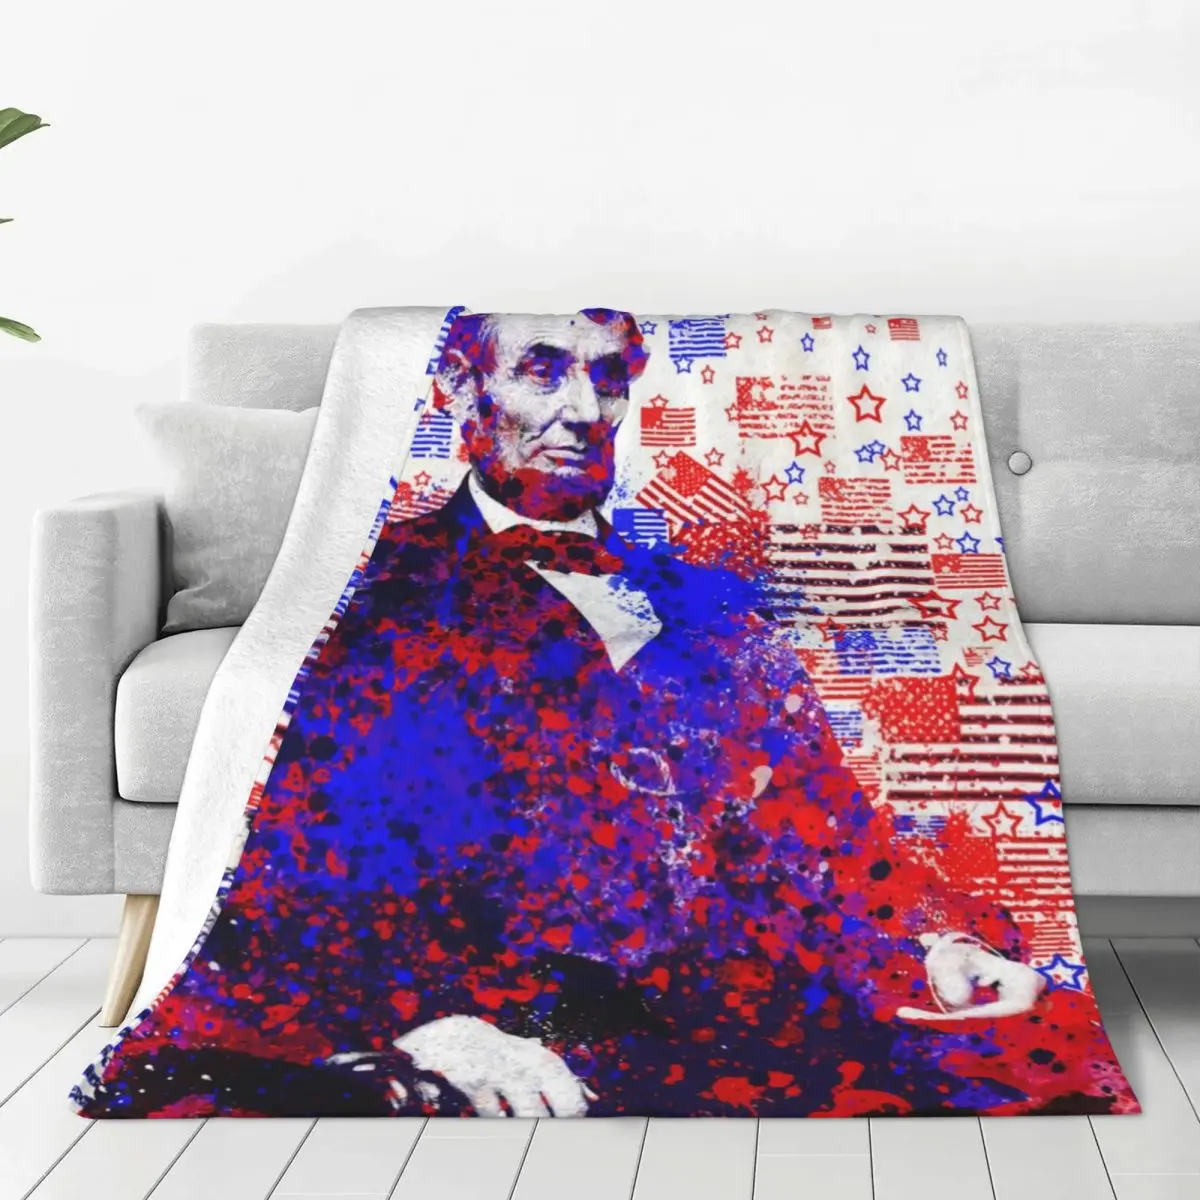 4th Of July Blanket Abraham Lincoln With Flags Super Soft Cheap Bedspread Decorative Fleece For Photo Shoot Blanket